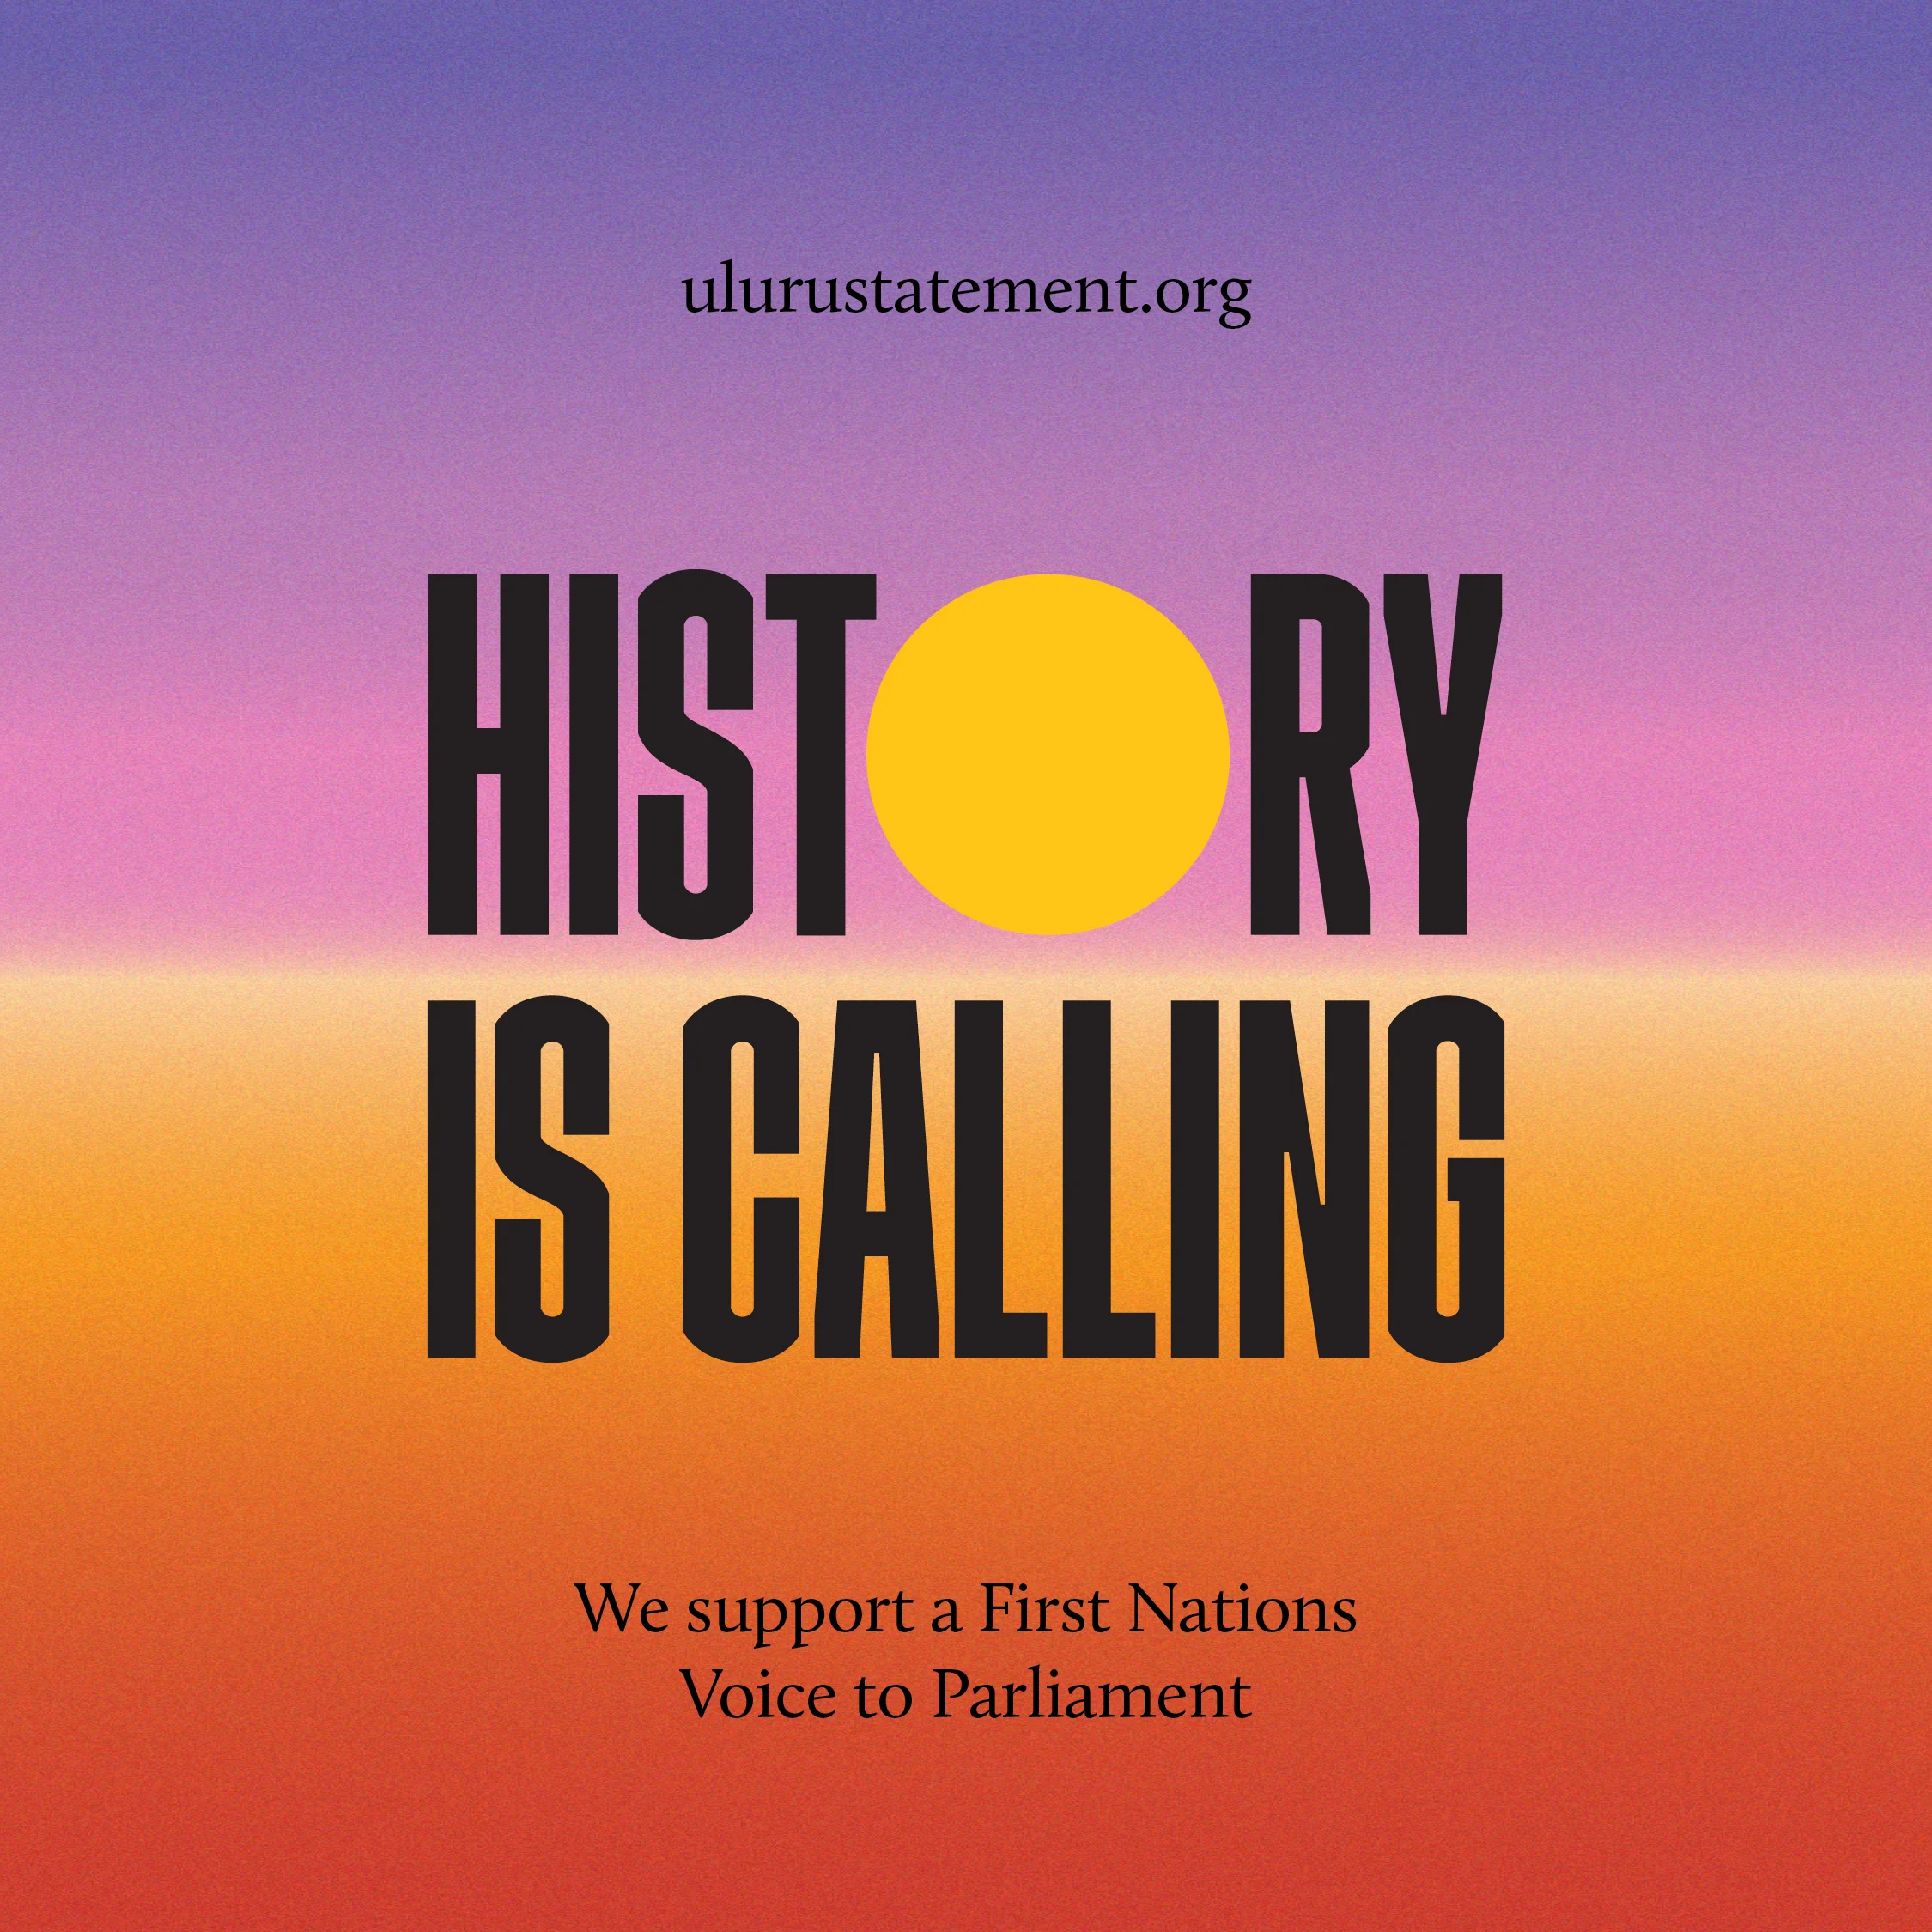 History is calling. Oxfam supports a First Nations Voice to Parliament